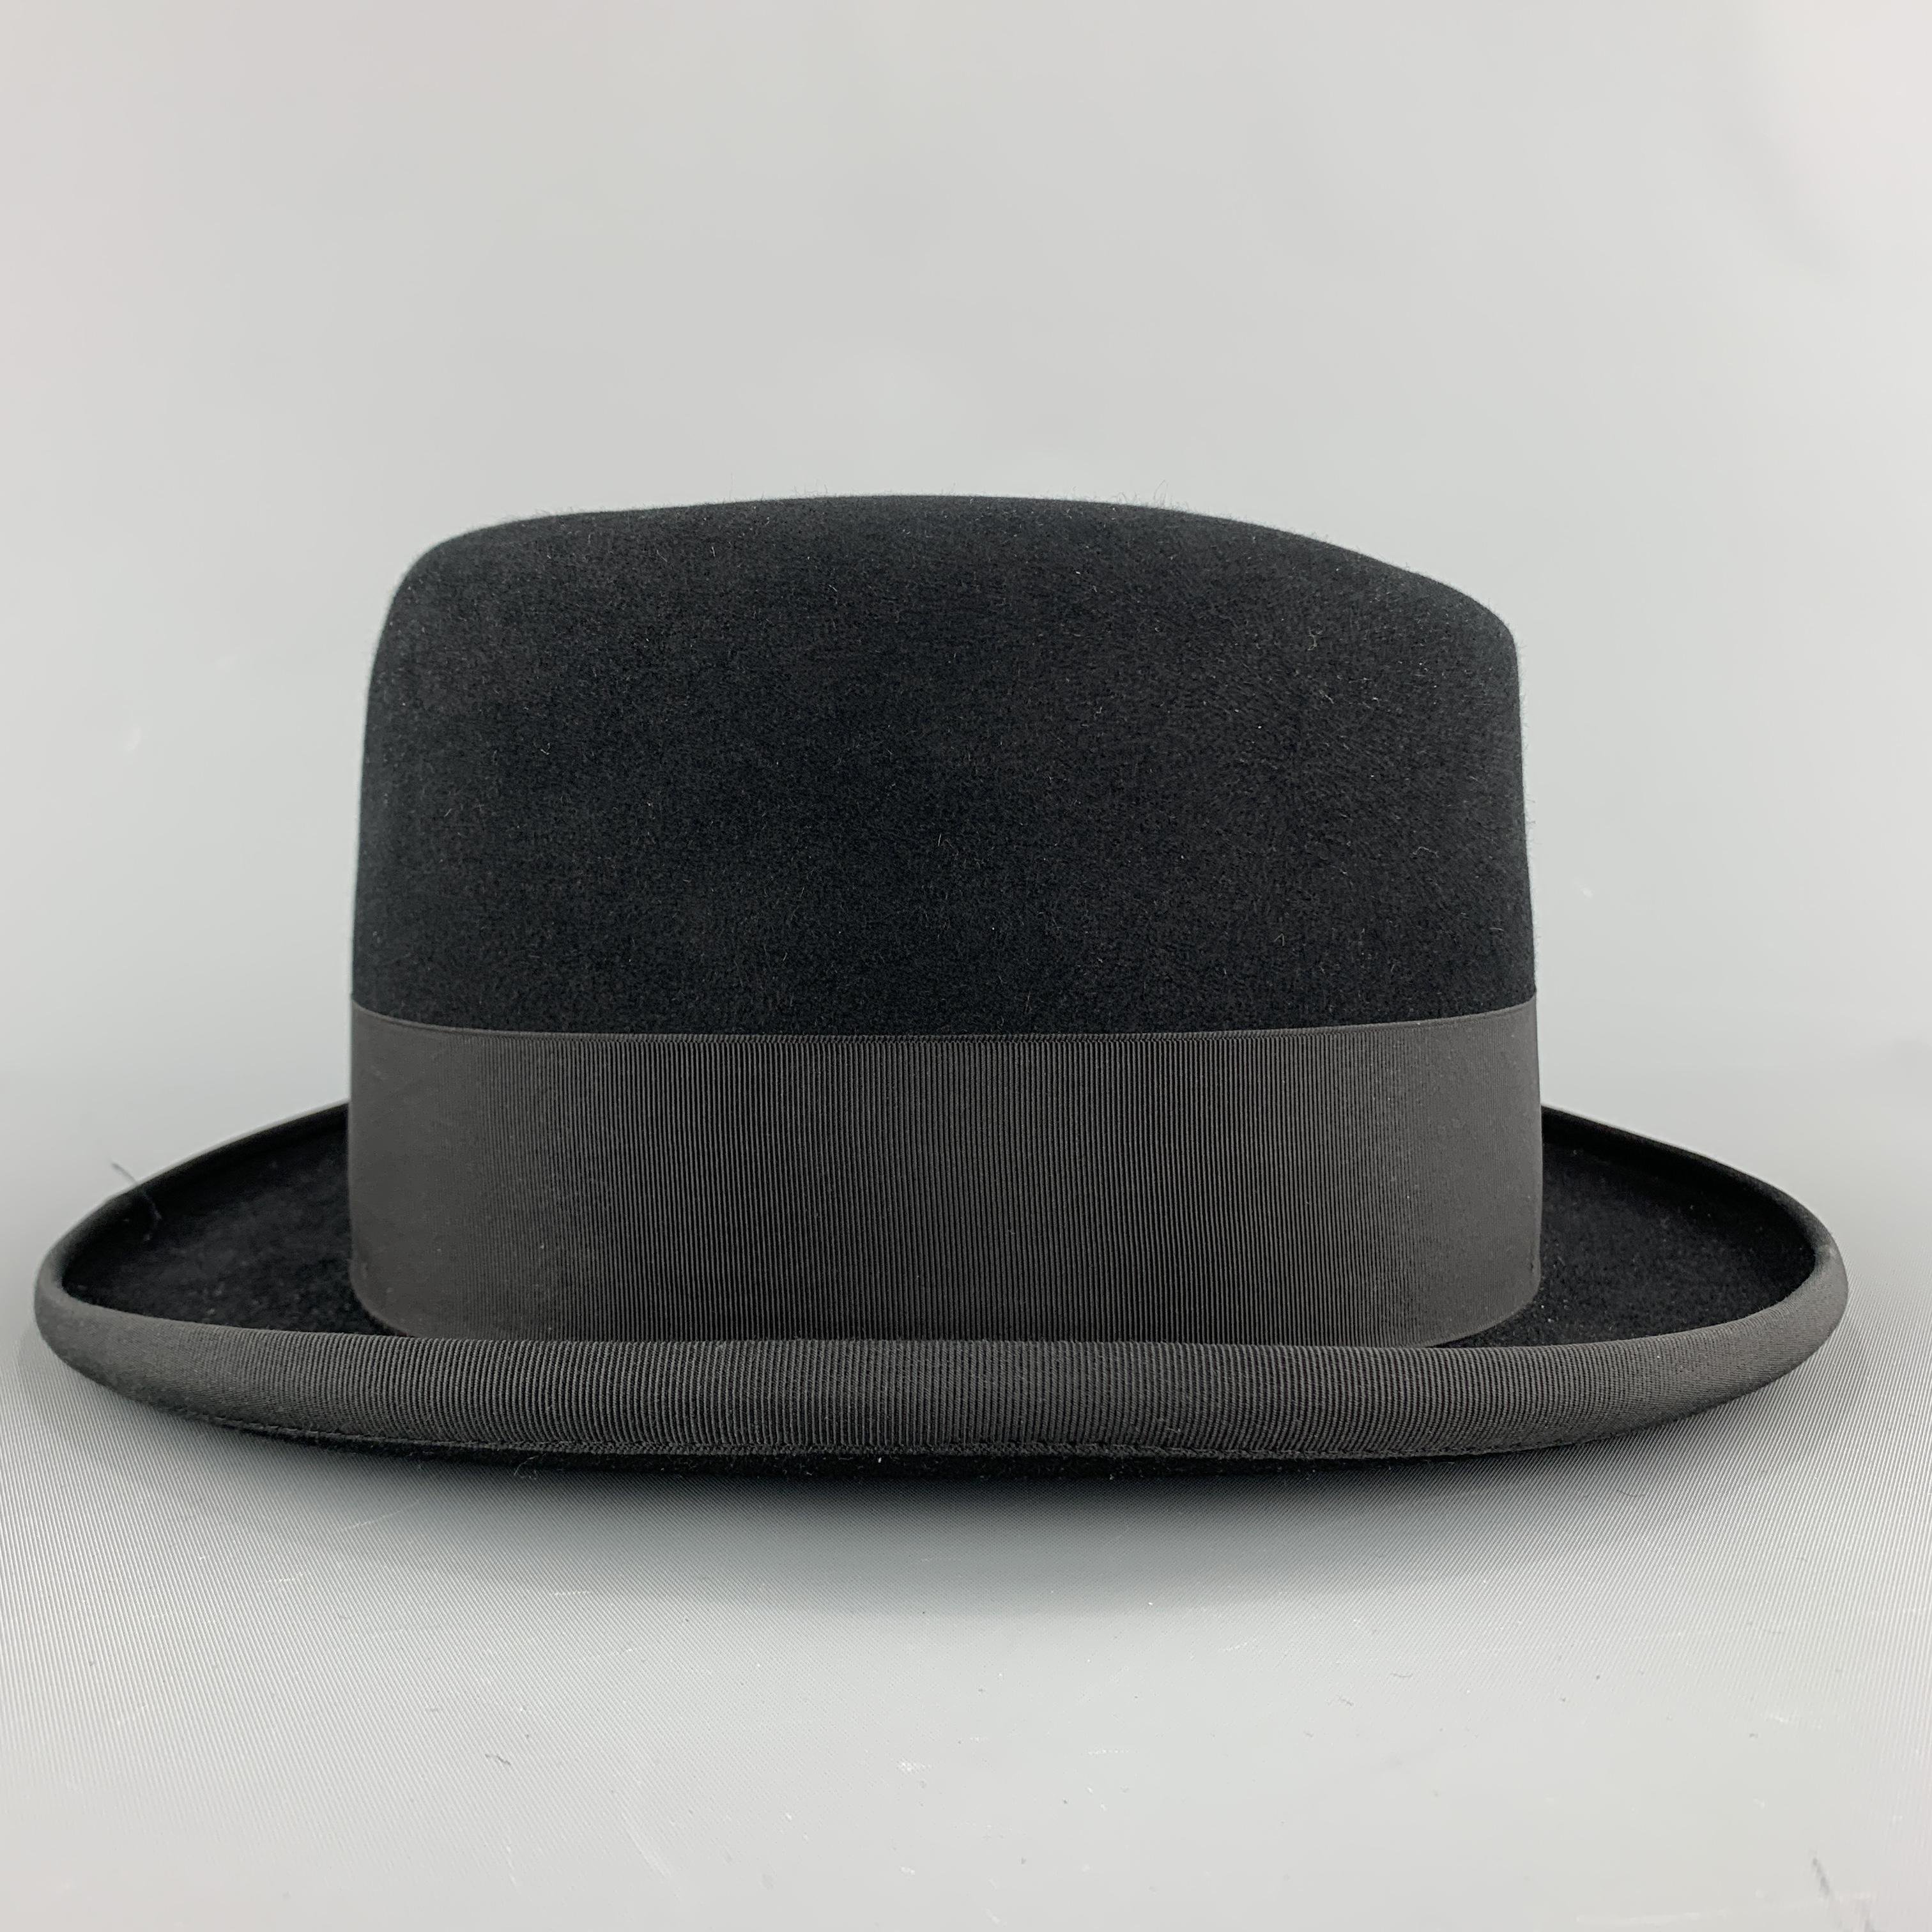 LOCK & CO HATTERS hat comes in black fine fur felt with grosgrain ribbon trim and bow. Hand Made in England.

Very Good Pre-Owned Condition.
Marked: 7 1/4 59 L

Measurements:

Opening: 24 in.
Brim: 1.75 in.
Height: 5 in. 